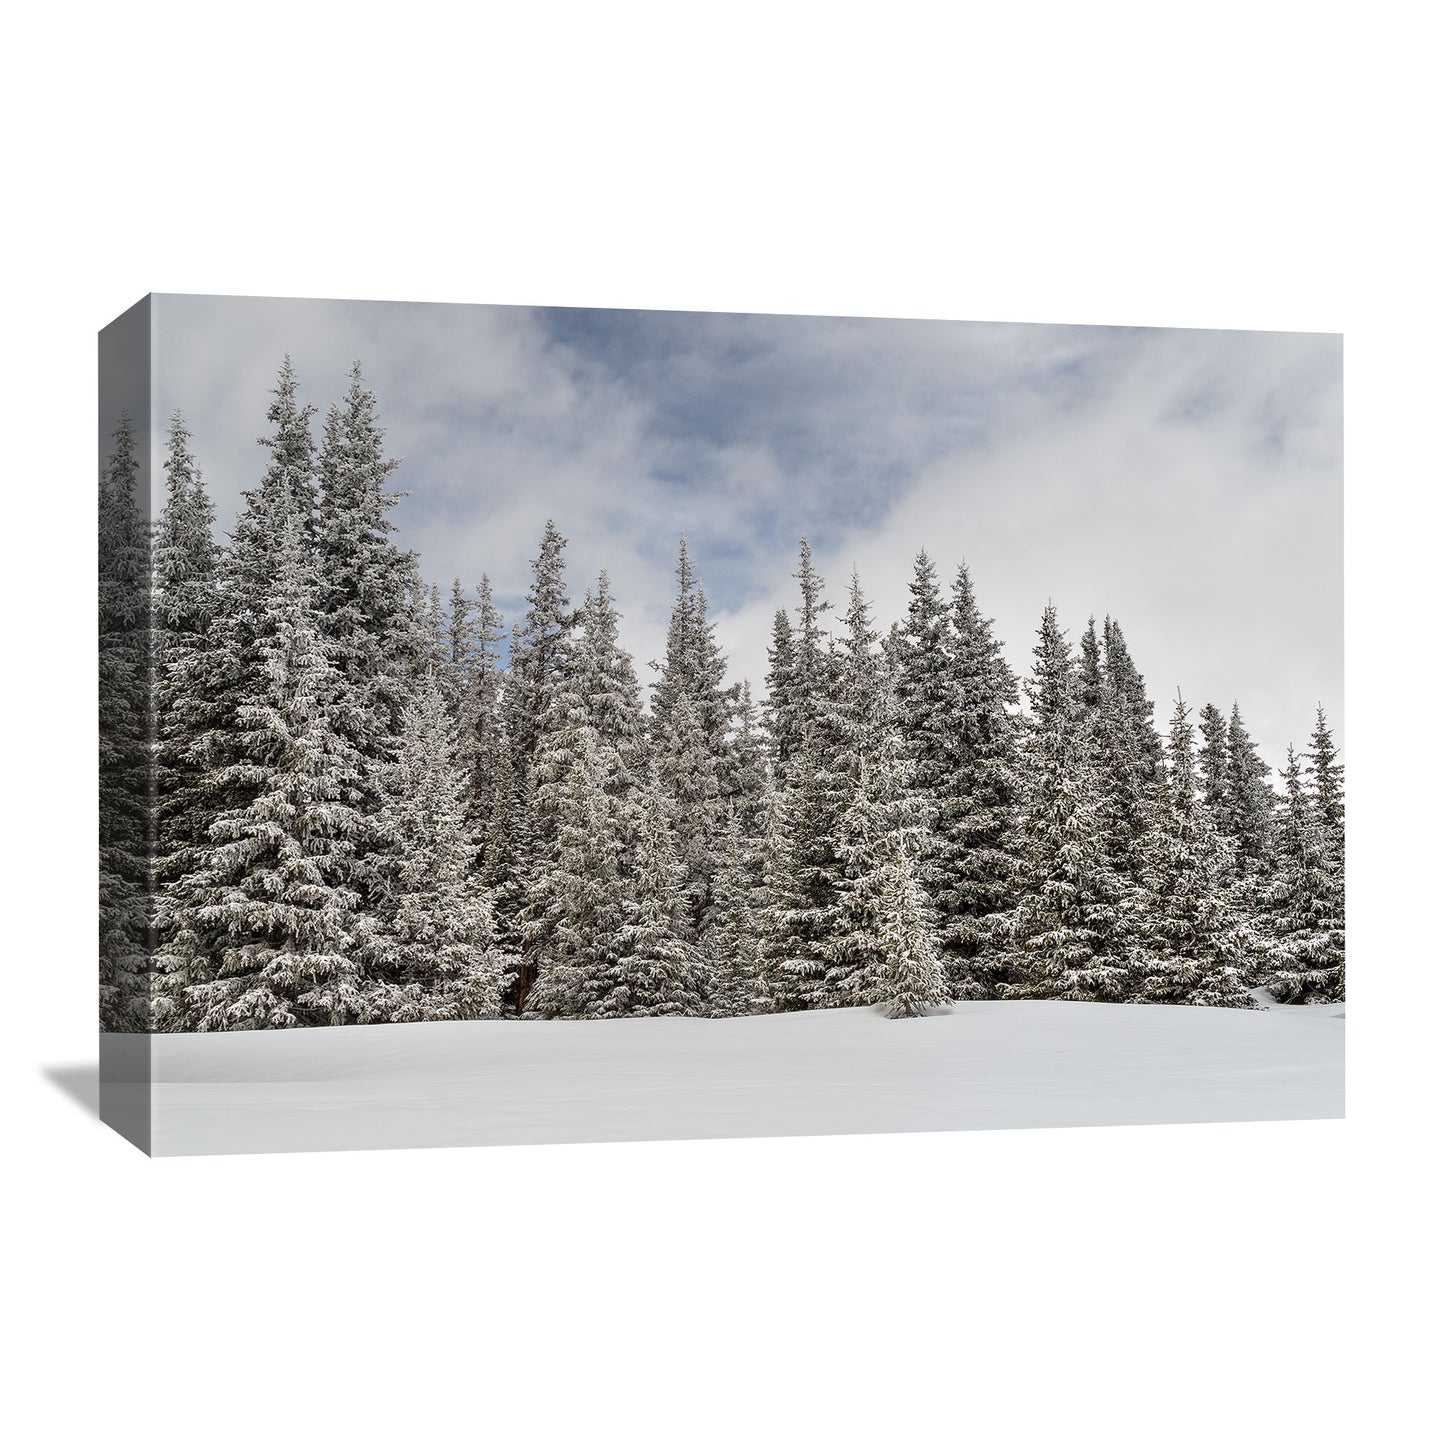 winter landscape of snowy pines at Hoosier Pass in Colorado